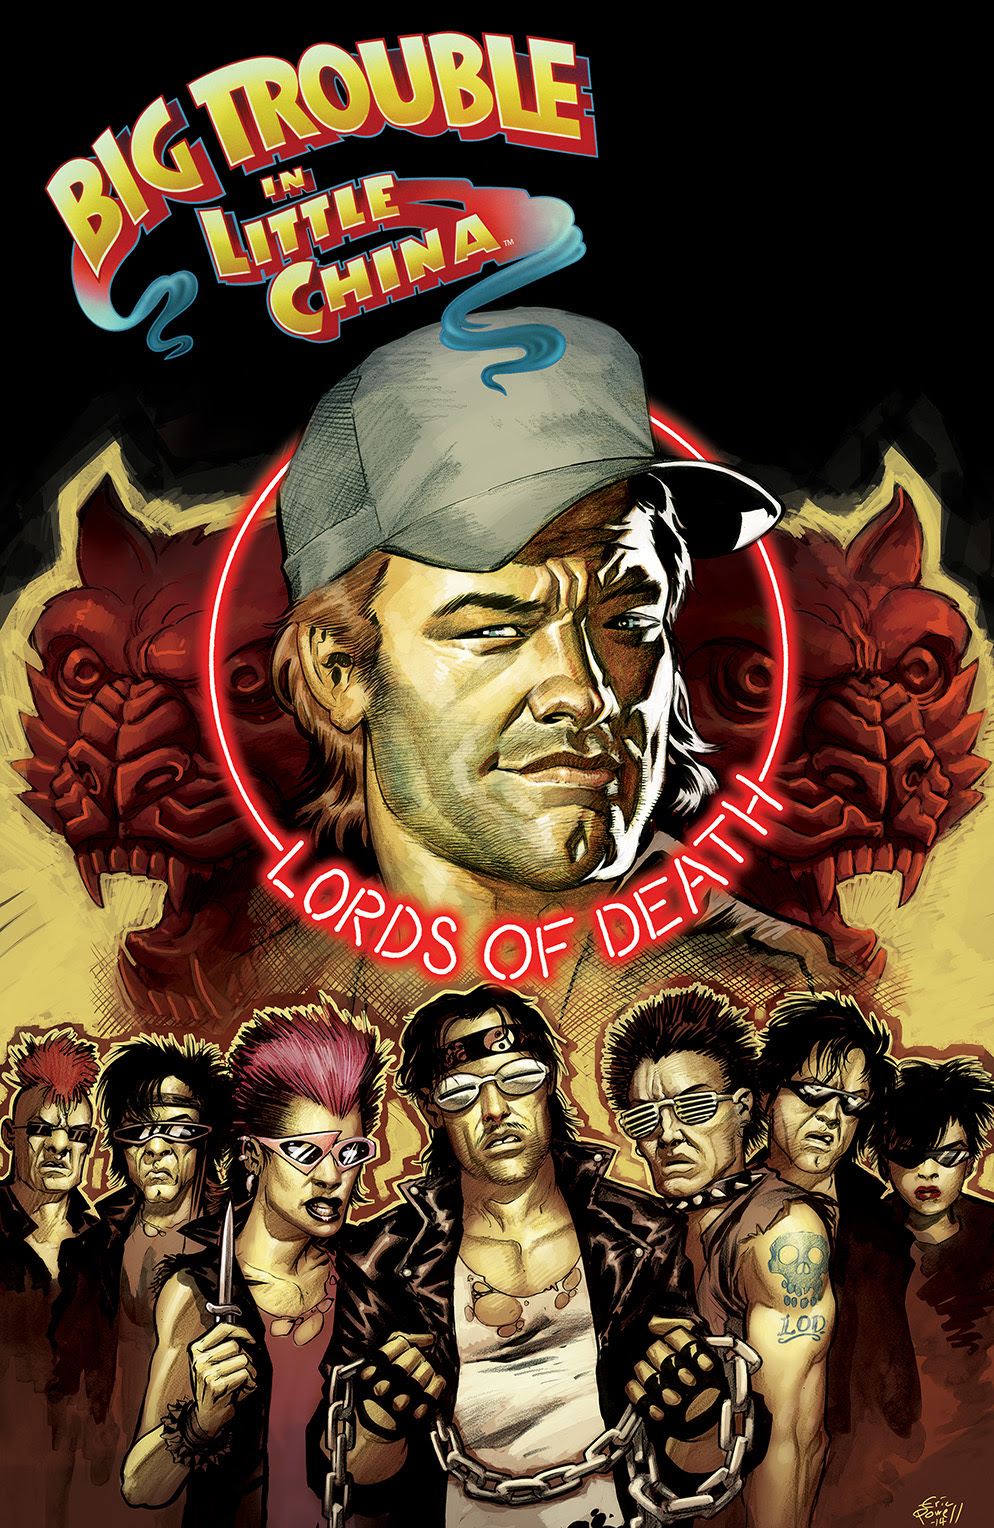 BIG TROUBLE IN LITTLE CHINA #7 Cover A by Eric Powell